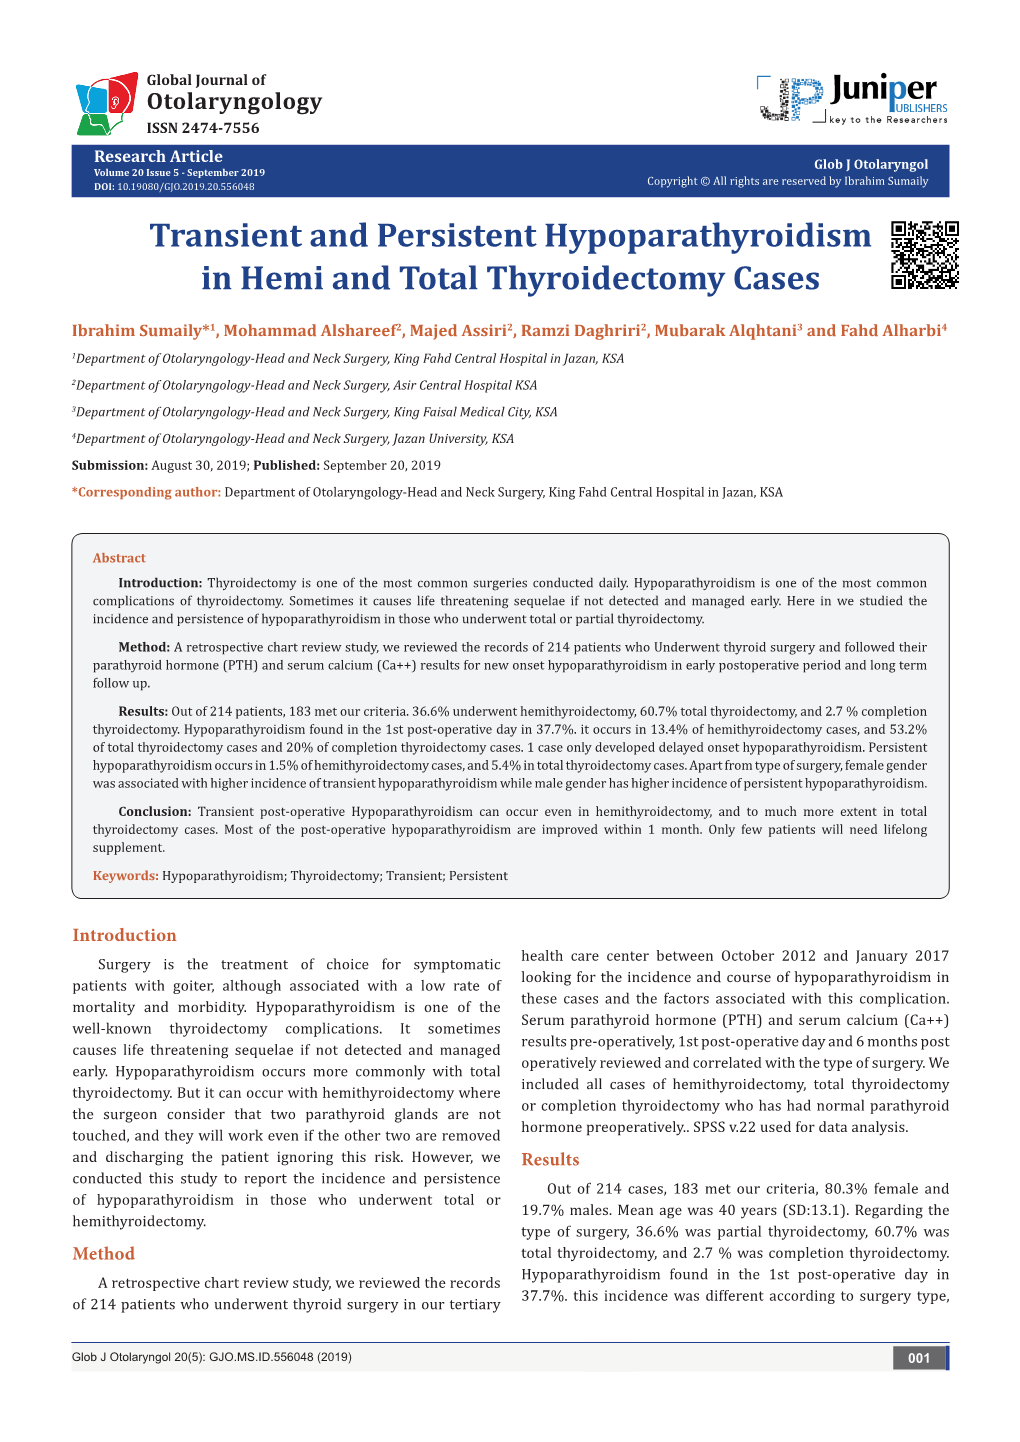 Transient and Persistent Hypoparathyroidism in Hemi and Total Thyroidectomy Cases